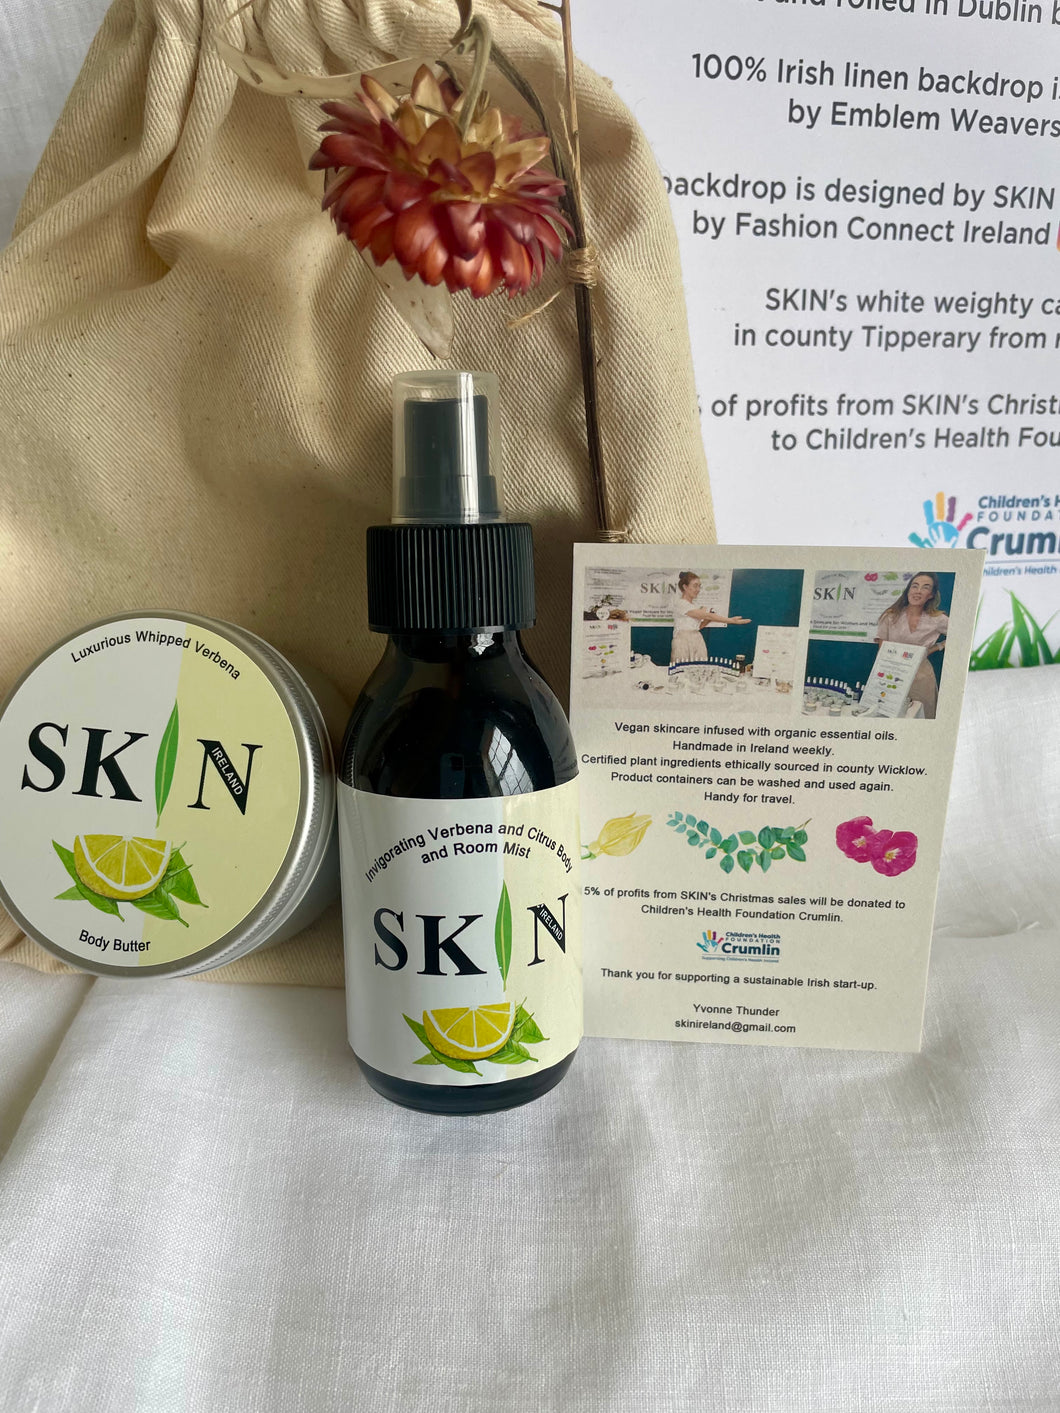 Sustainable Gift Bag of Medium (100ml) Luxurious Verbena Body Butter and Invigorating Verbena Citrus Body and Room Mist.  Gift bag features Irish grown and dried flower, hand-sewn onto linen bag.  Ready to gift - no wrapping necessary!